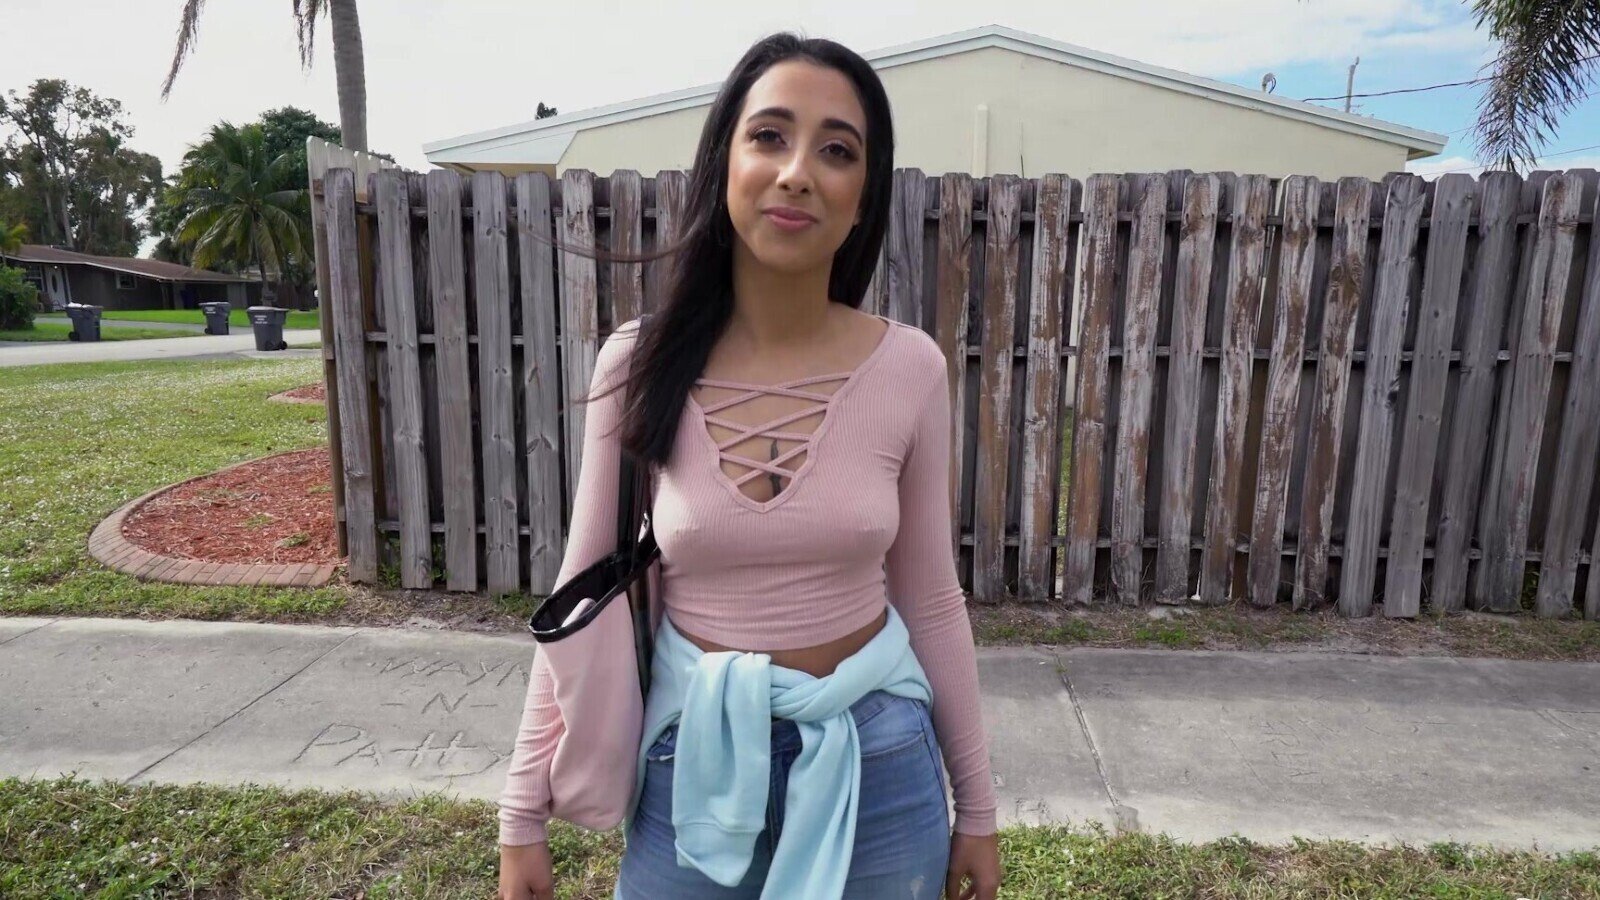 Kiarra Nava Hoe was intrigued by and acted on a stranger's offer